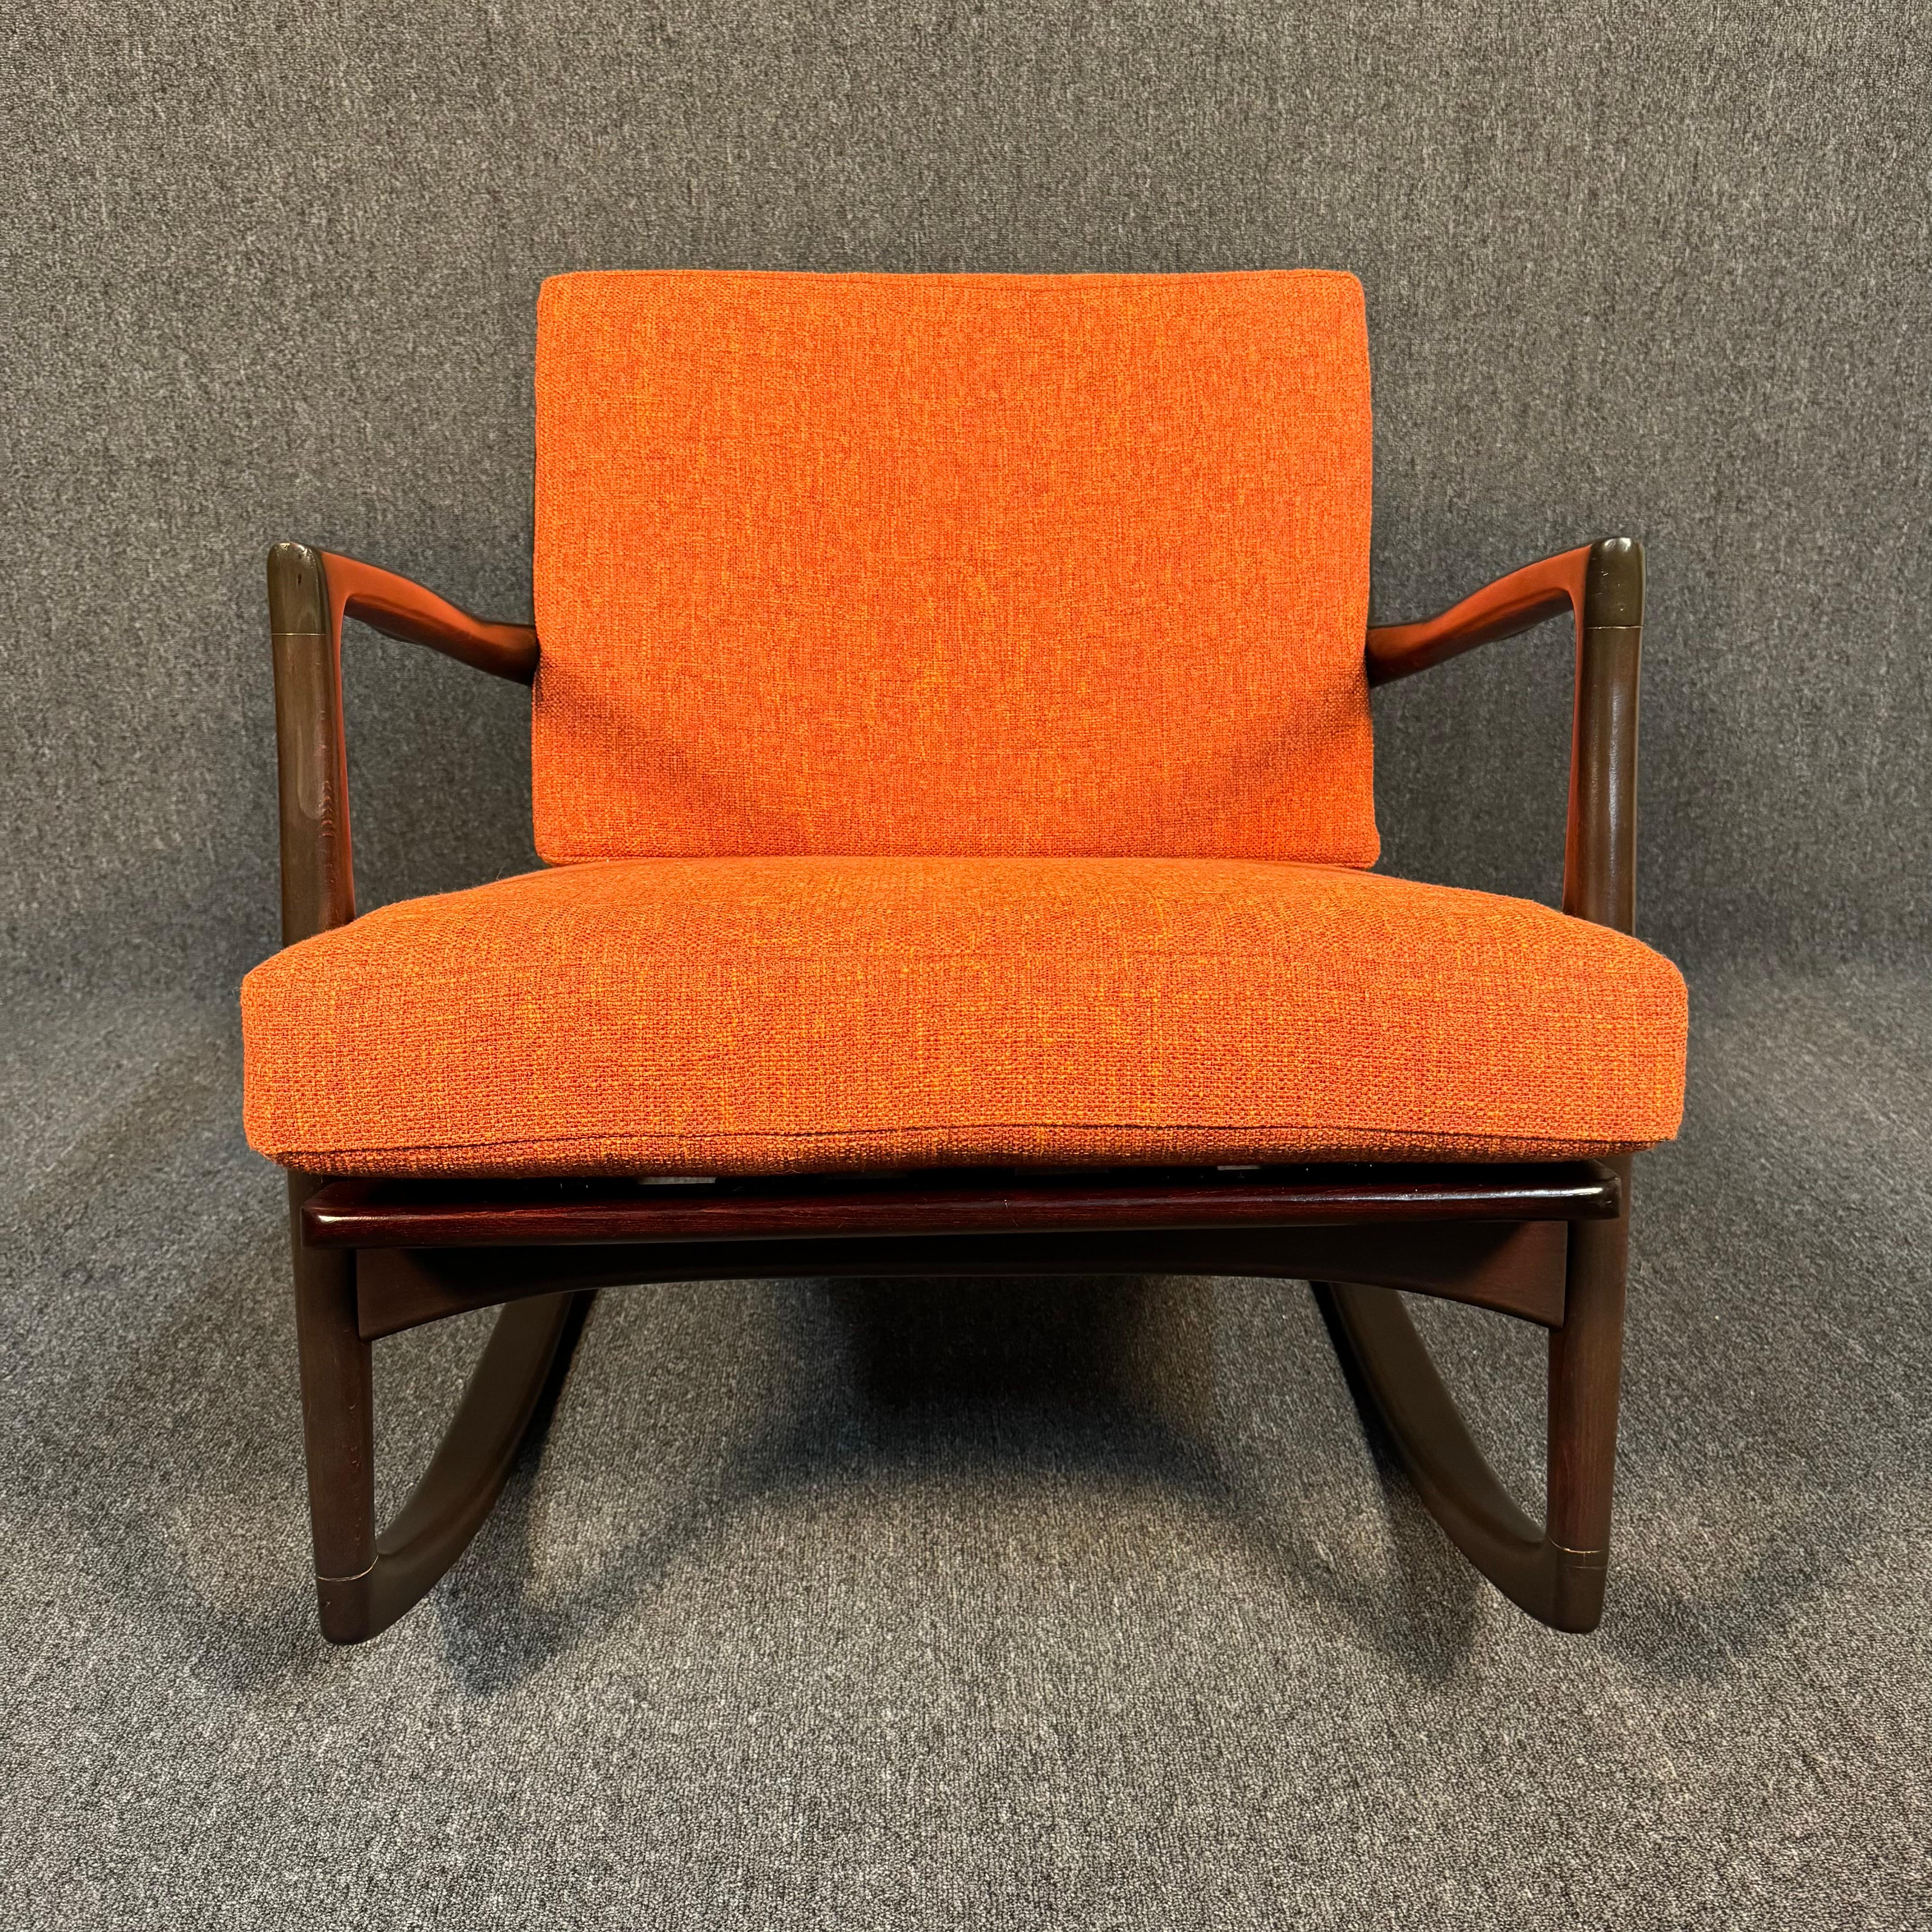 Here is a beautiful scandinavian modern rocker designed by Ib Kofod Larsen and manufactured by Selig in Denmark in the 1960's.
This stunning chair features a solid dark walnut stained beech sculptural frame previously refinished paired with a set of